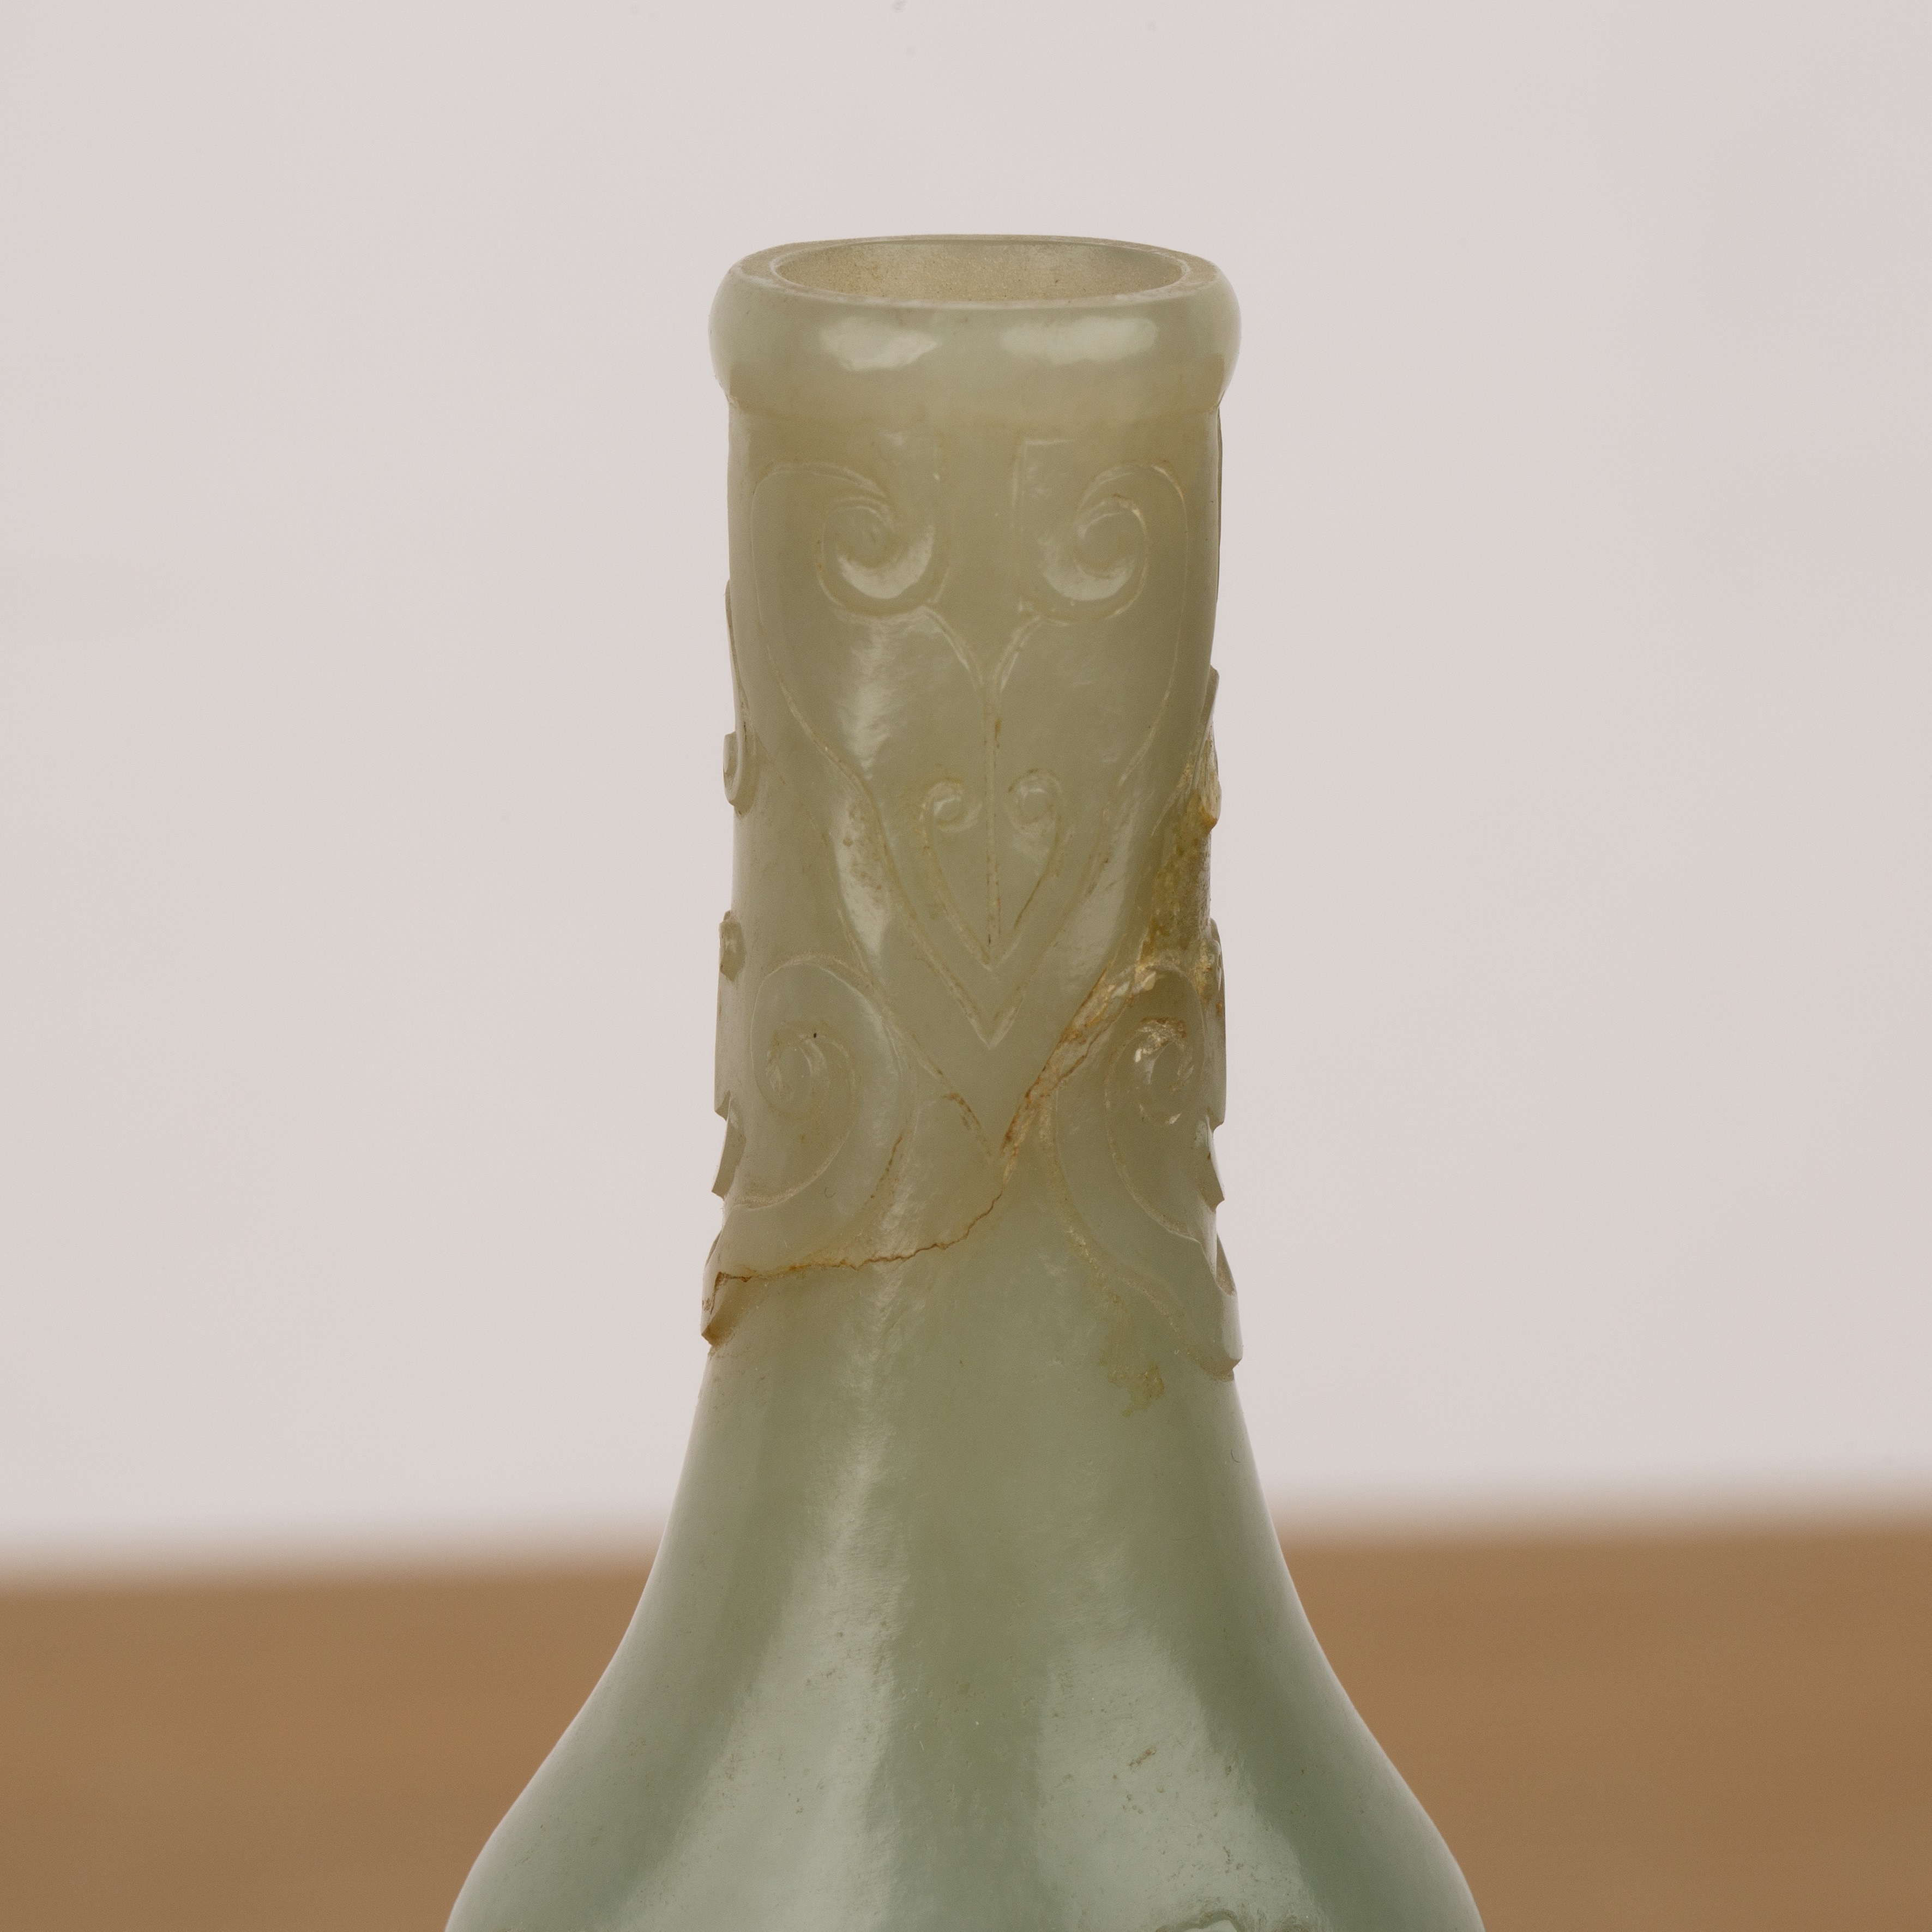 Small jade miniature vase on a wood stand Chinese, 18th/19th Century carved with flowers and - Image 4 of 10